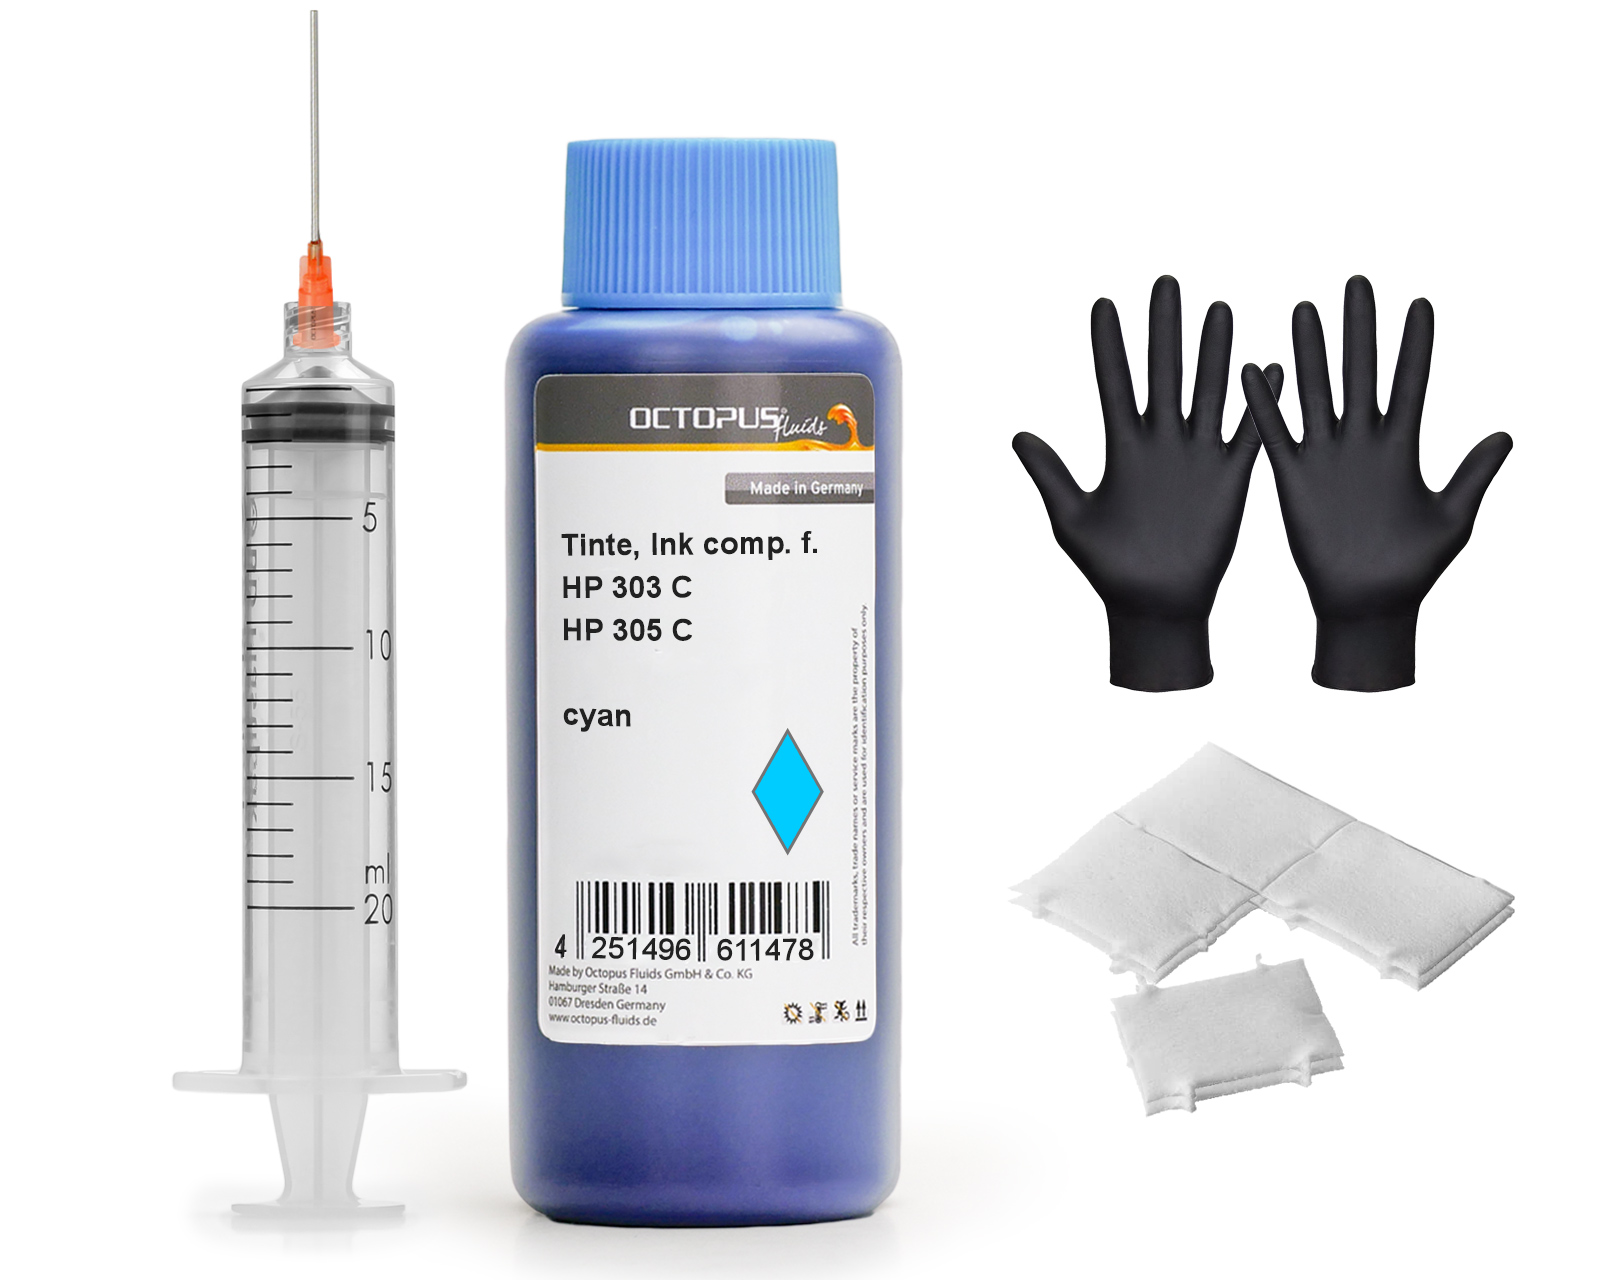 Refill ink for HP 303 and HP 305 ink, cyan with syringe, HP 303, 305, Printer Ink HP, Printer Ink